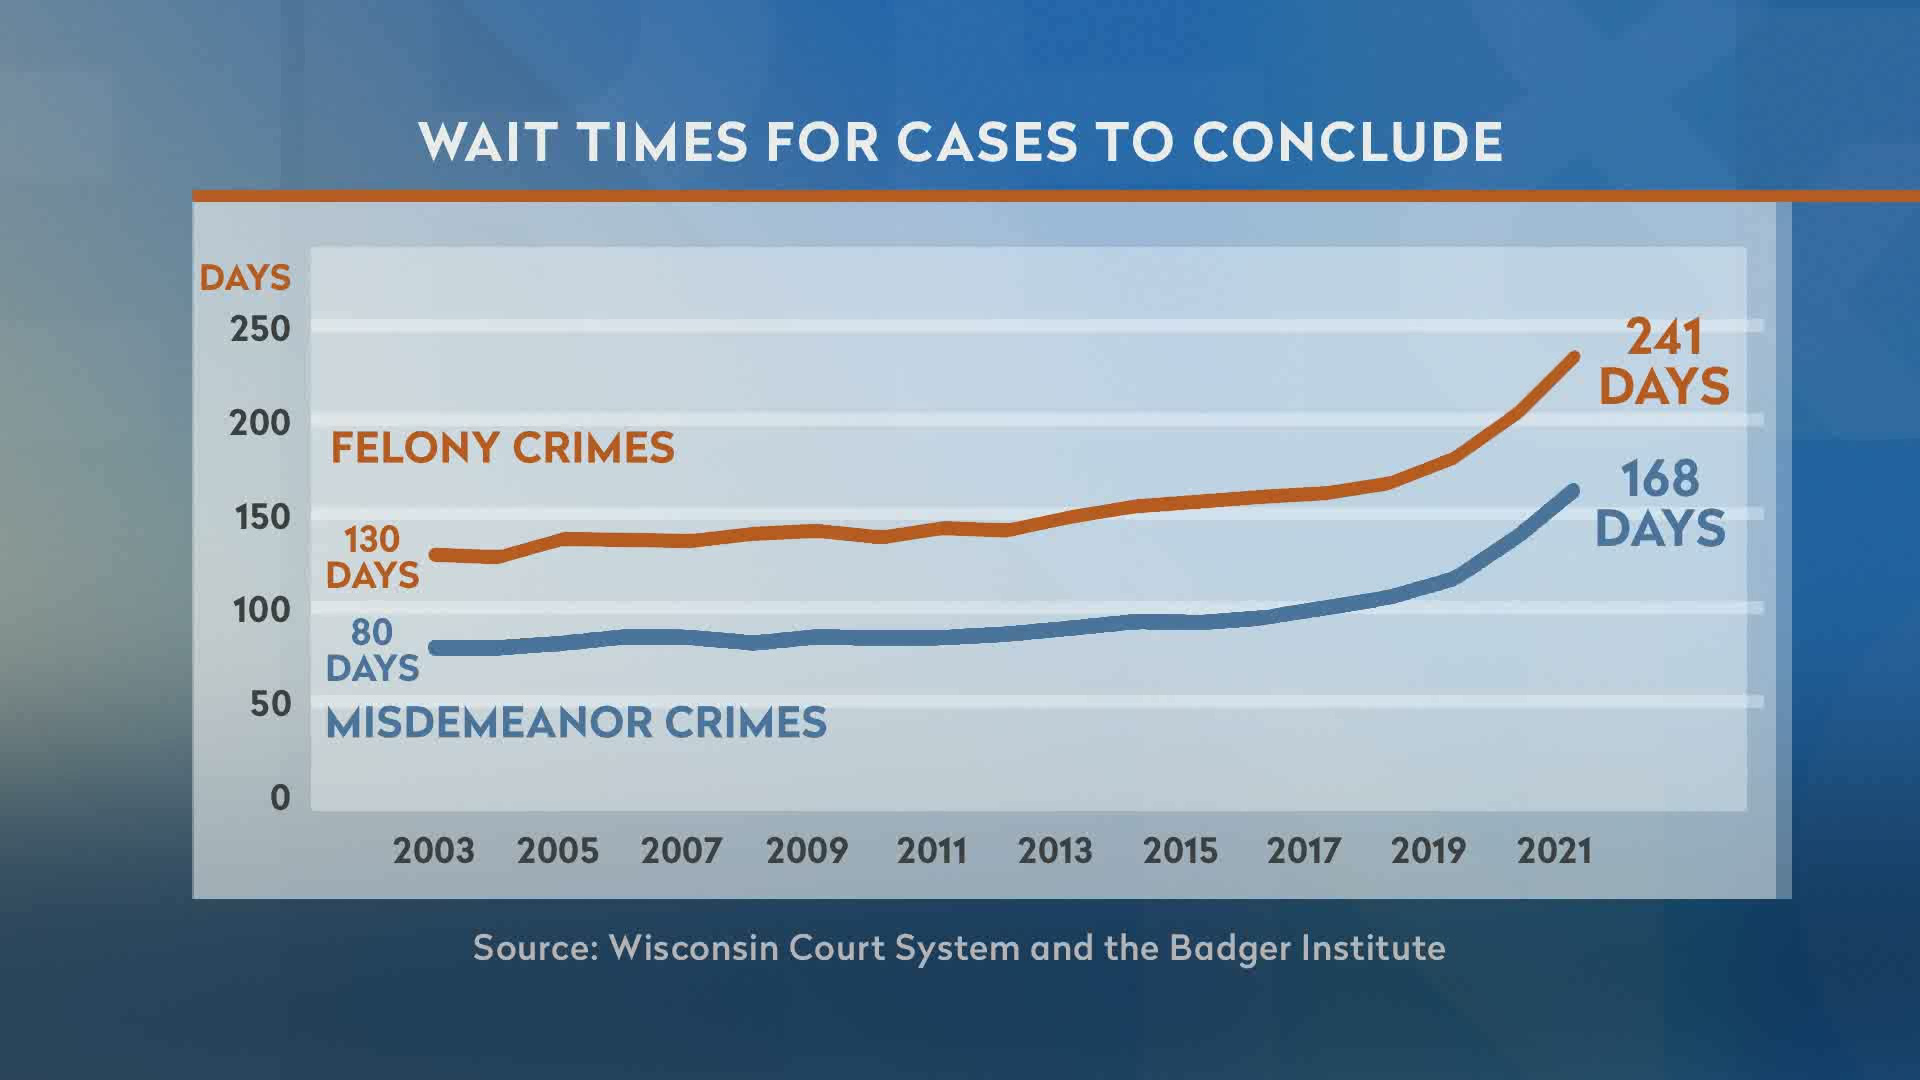 A graph titled "Wait Times for Cases to Conclude" shows how long it takes for felony and misdemeanor cases to conclude.